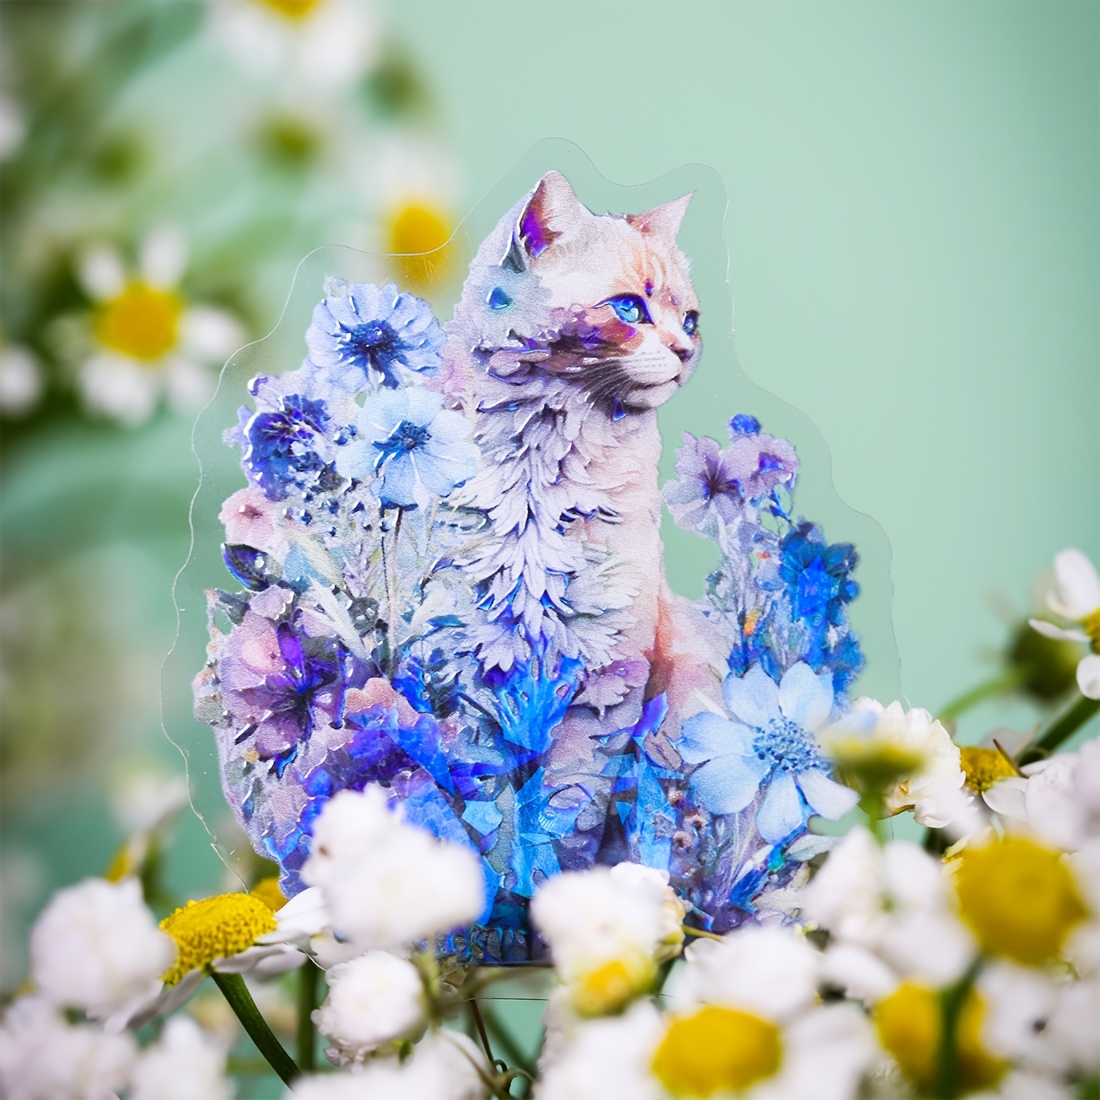 Cute cat with flowers, pet, floral stickers, cat stickers Sticker